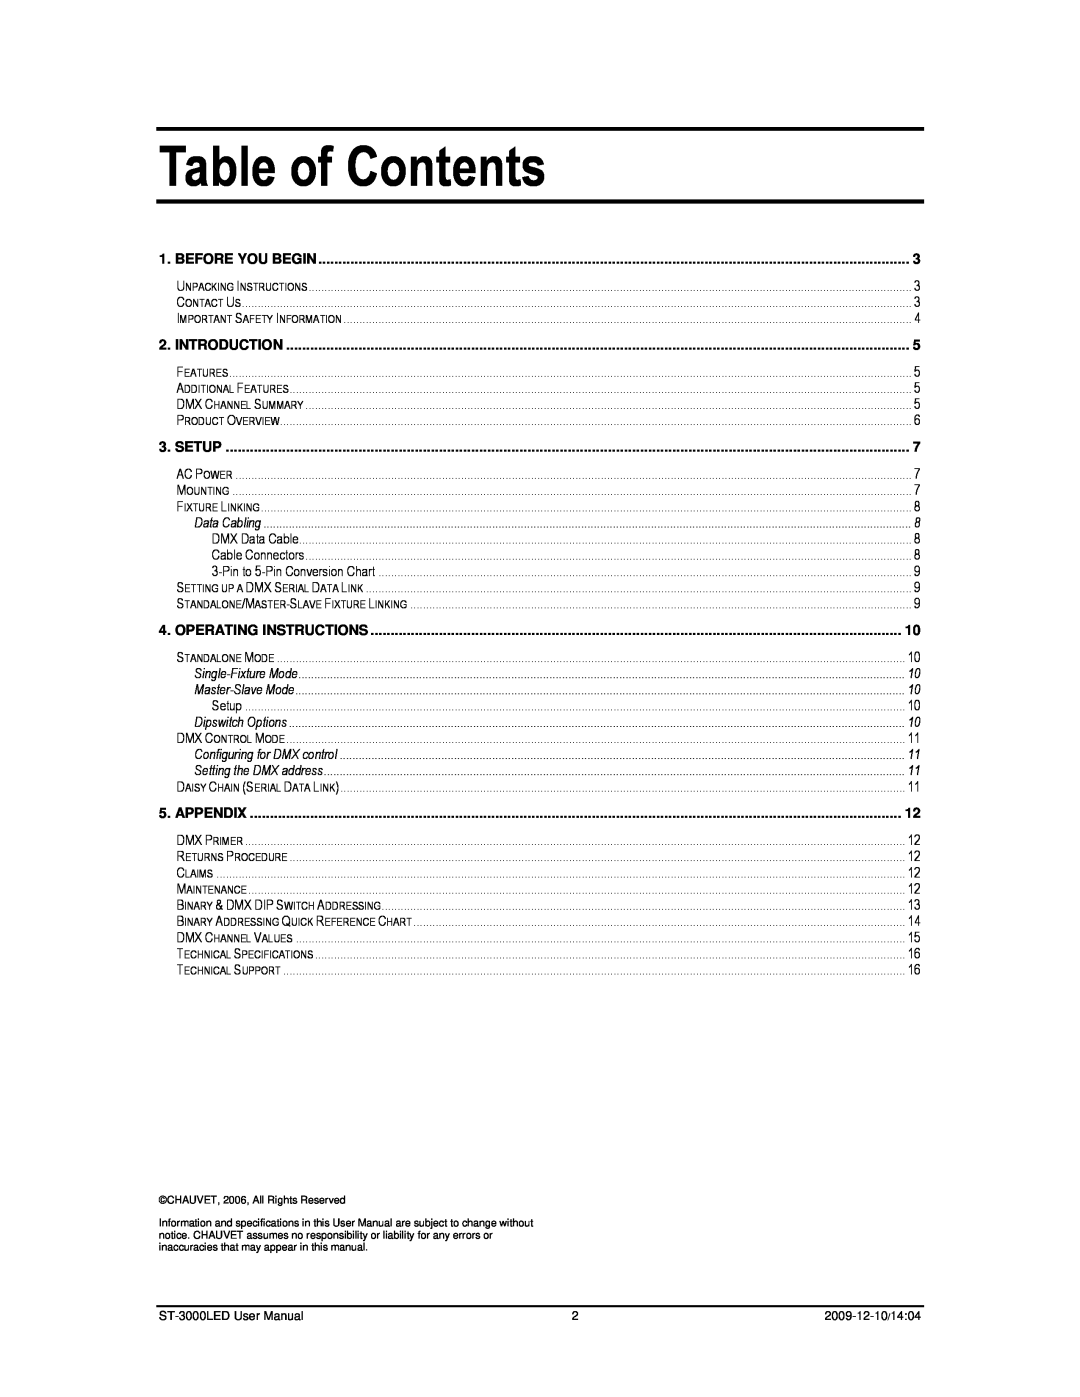 Chauvet ST-3000LED user manual Table of Contents, Before You Begin, Introduction, Setup, Operating Instructions, Appendix 